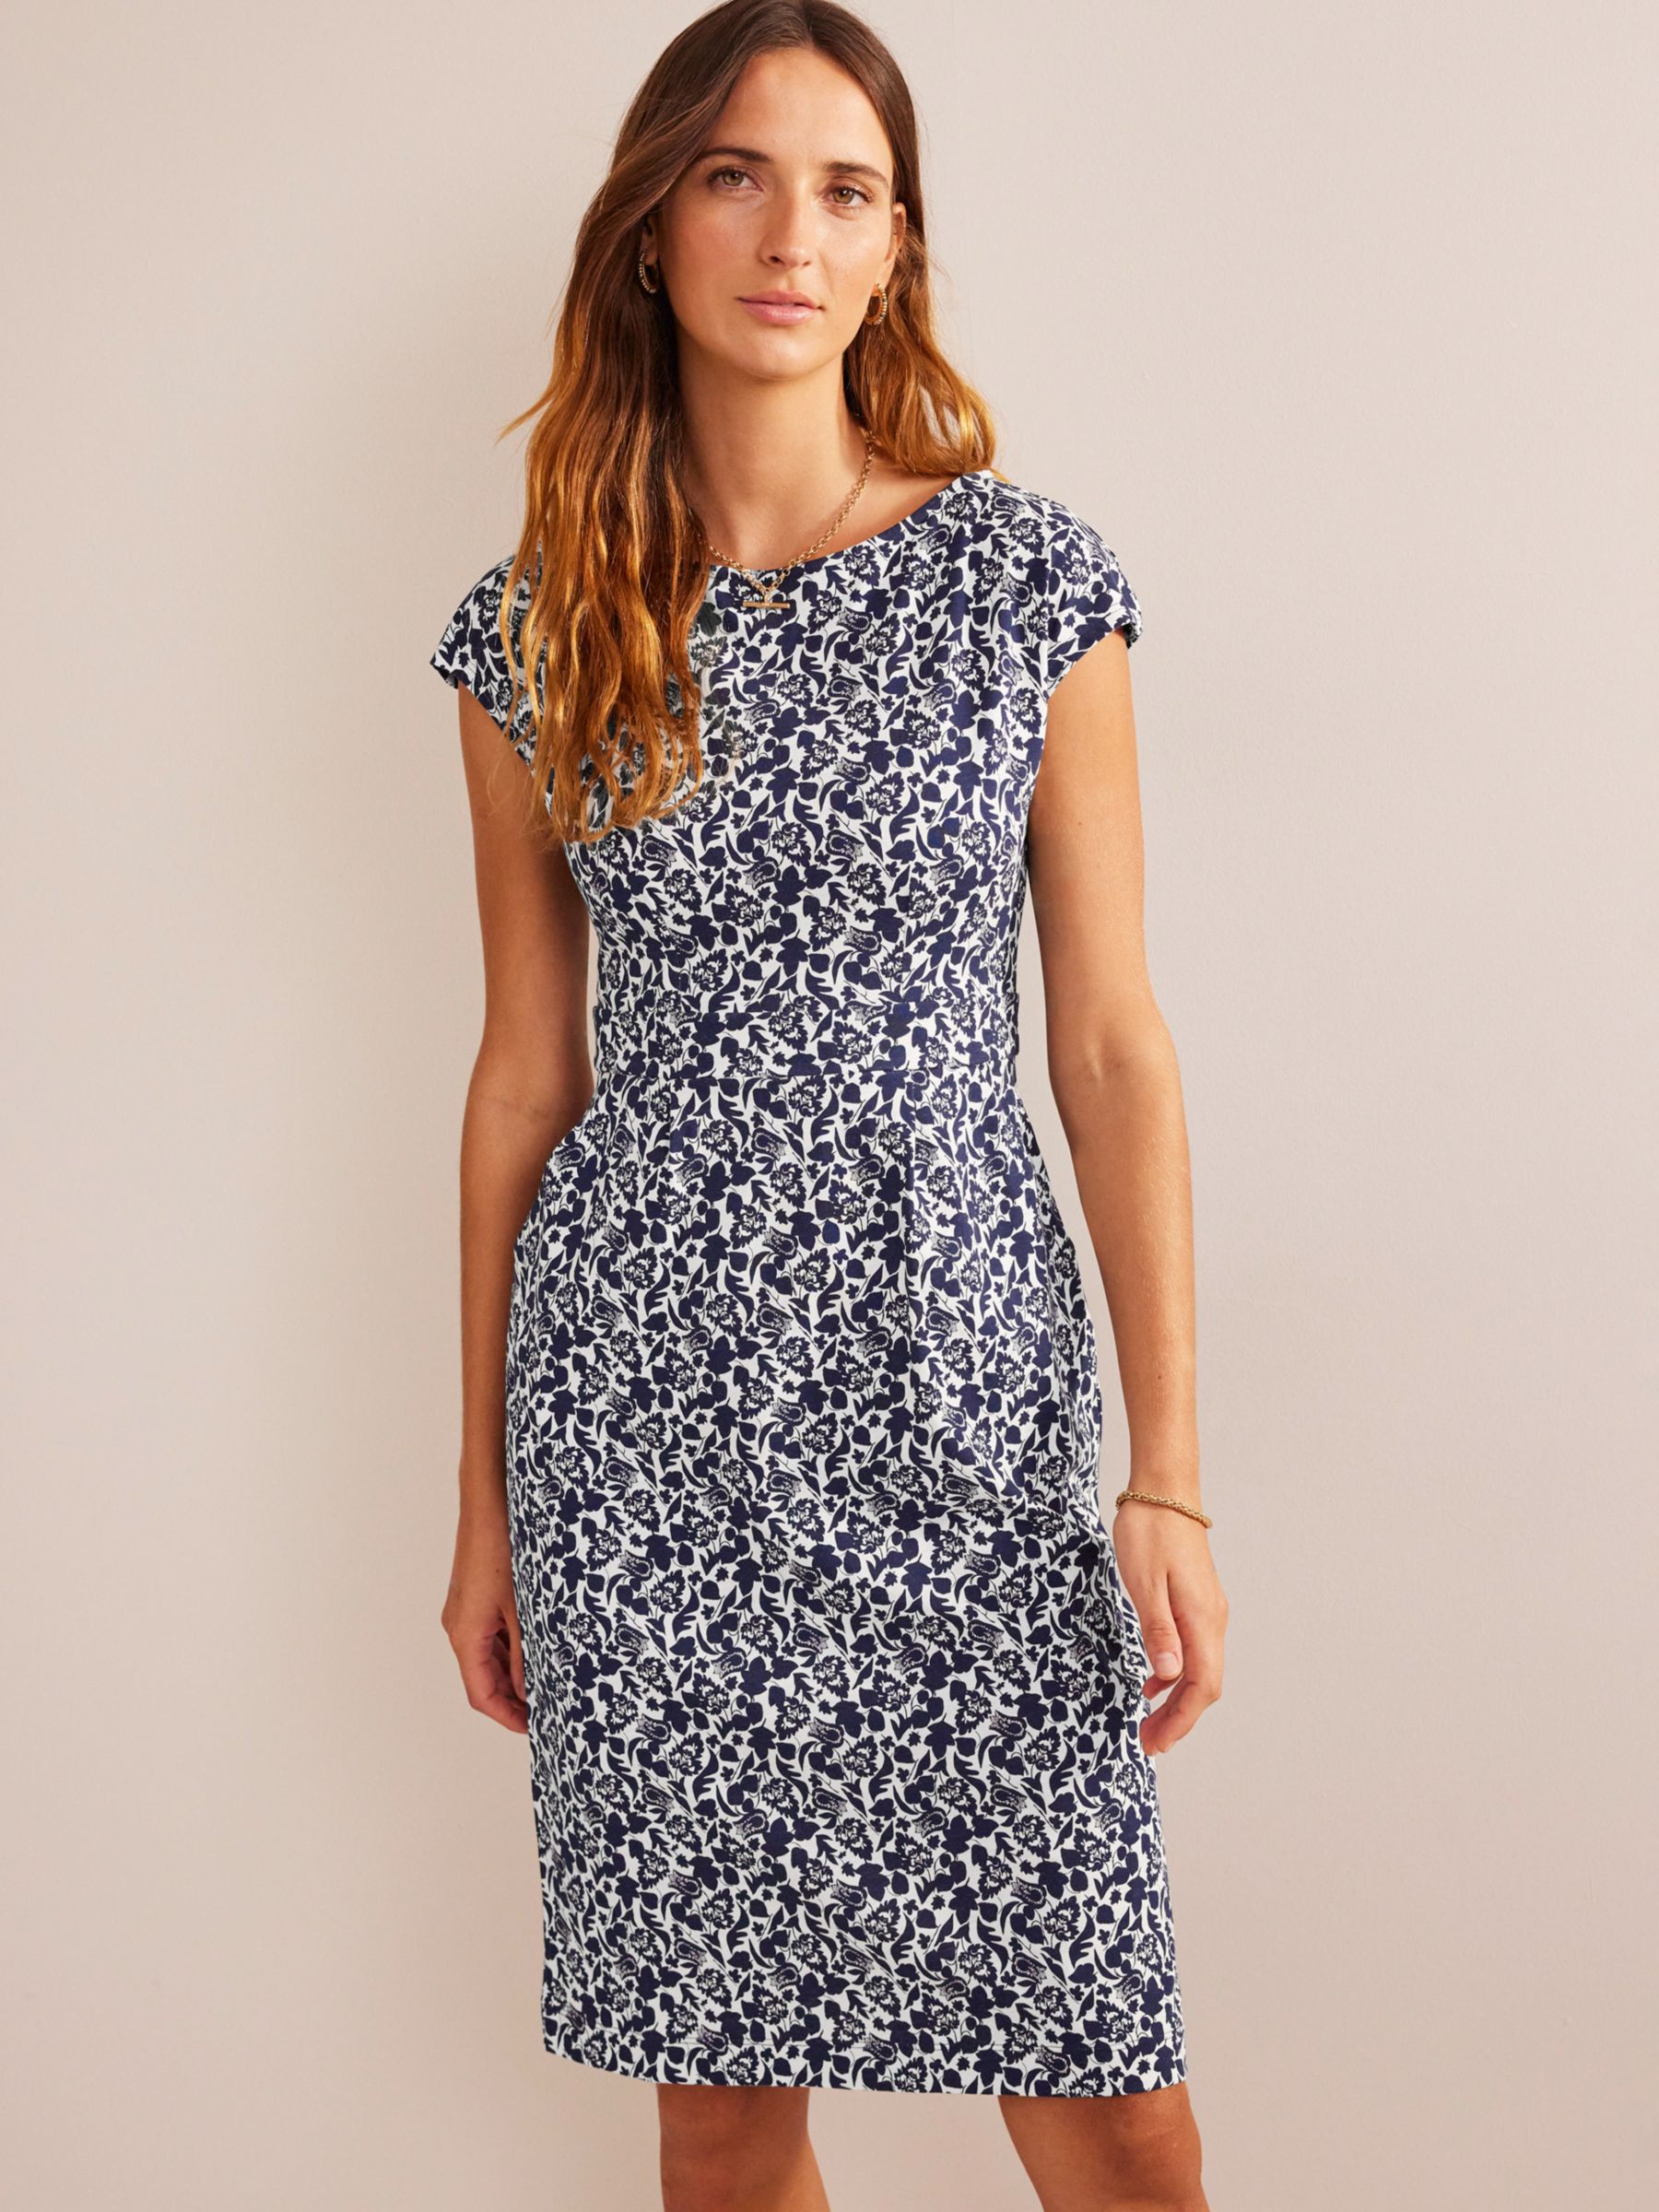 Boden Women Clothing John Lewis And Partners